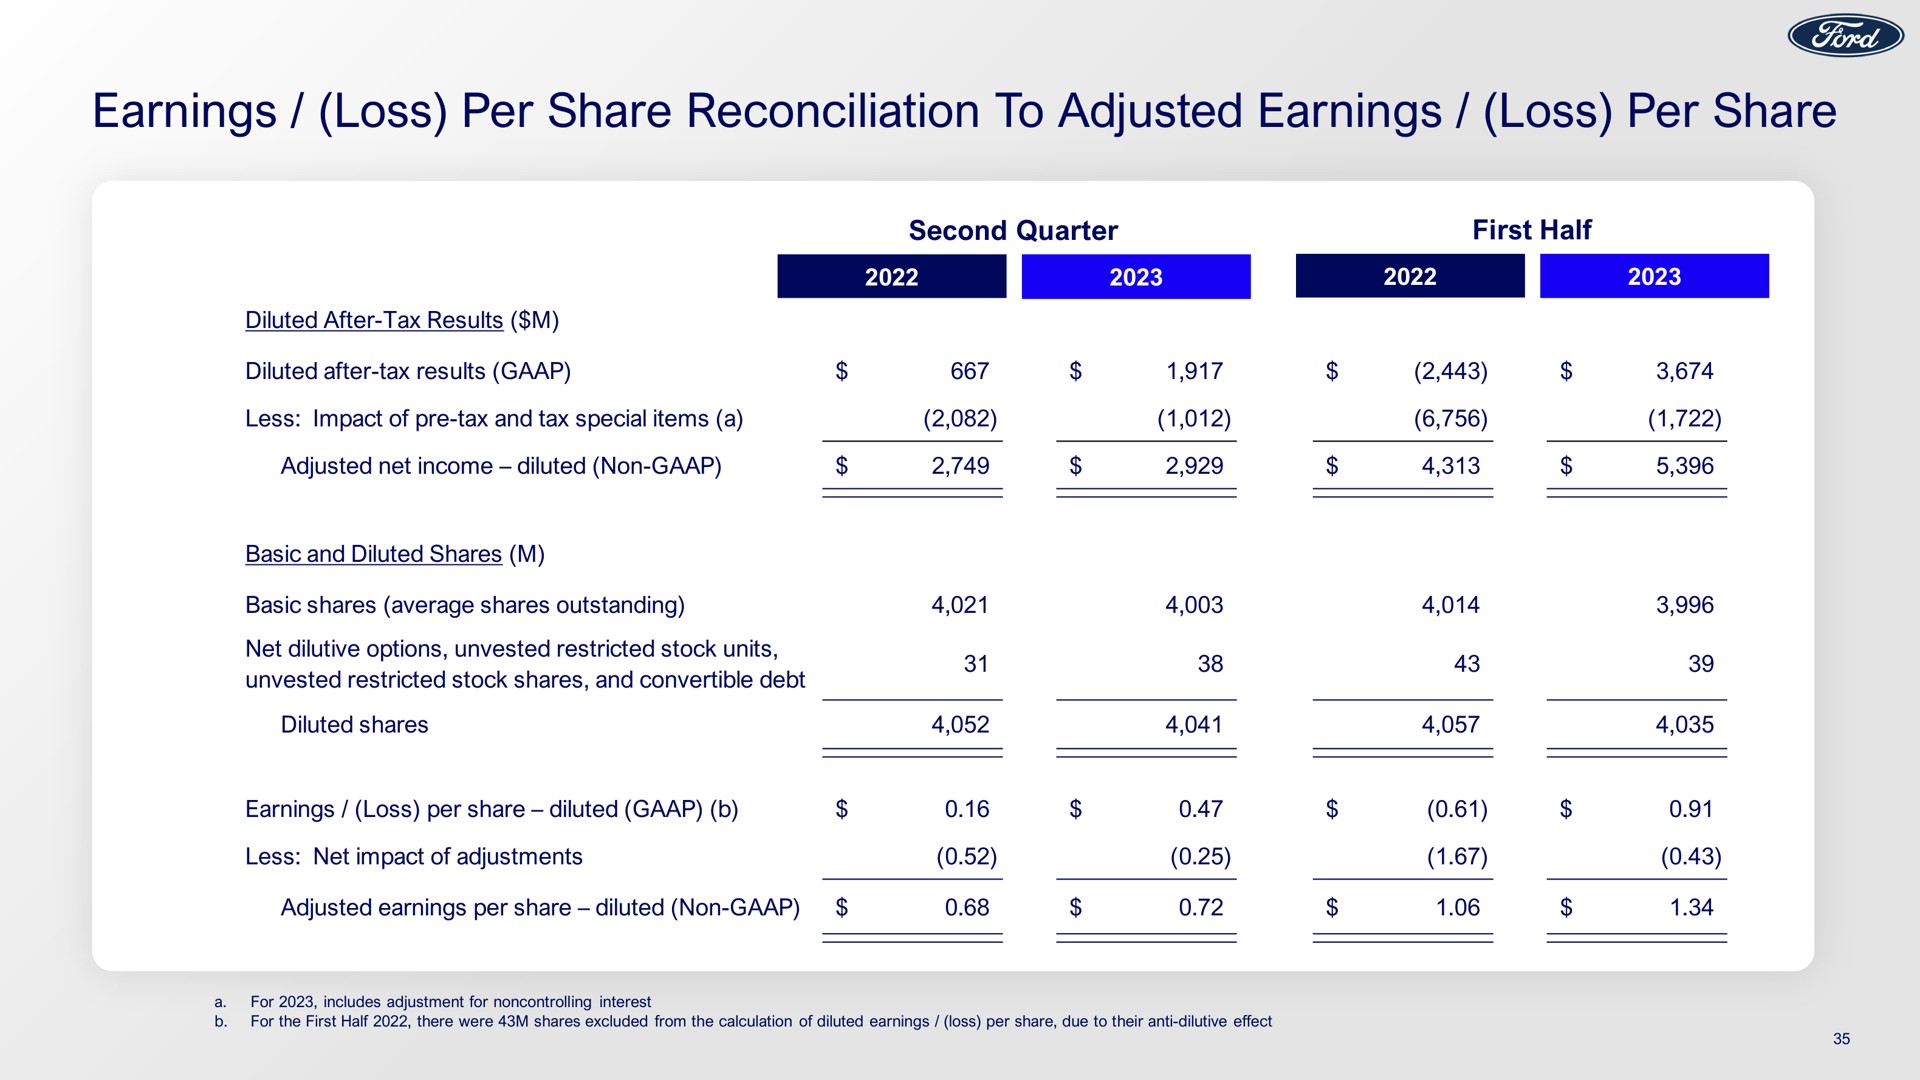 earnings loss per share reconciliation to adjusted earnings loss per share | Ford